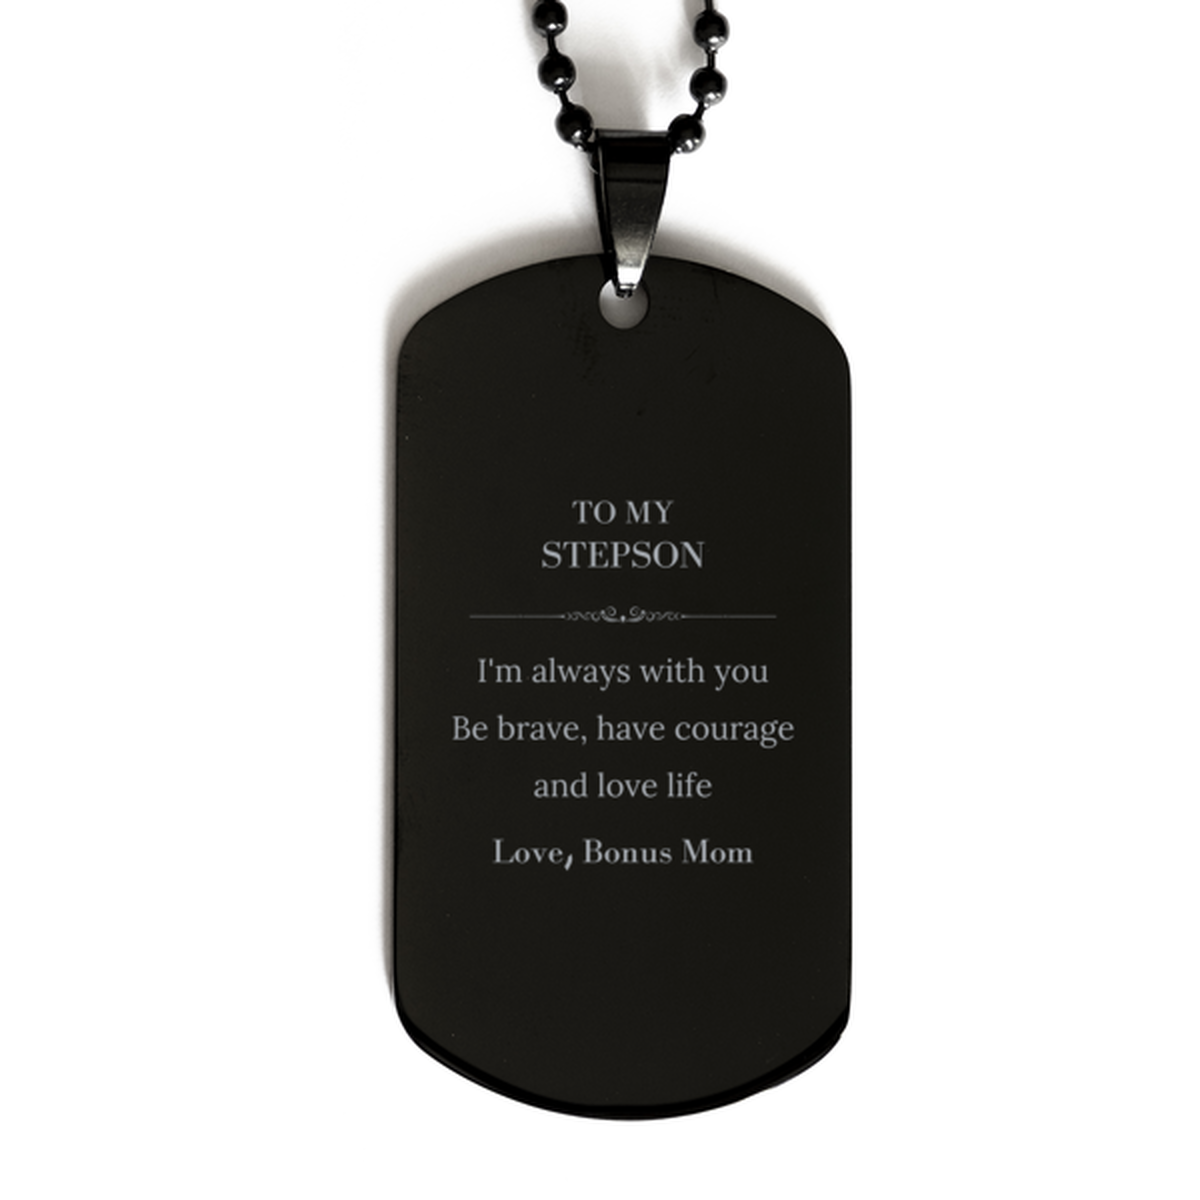 To My Stepson Gifts from Bonus Mom, Unique Black Dog Tag Inspirational Christmas Birthday Graduation Gifts for Stepson I'm always with you. Be brave, have courage and love life. Love, Bonus Mom